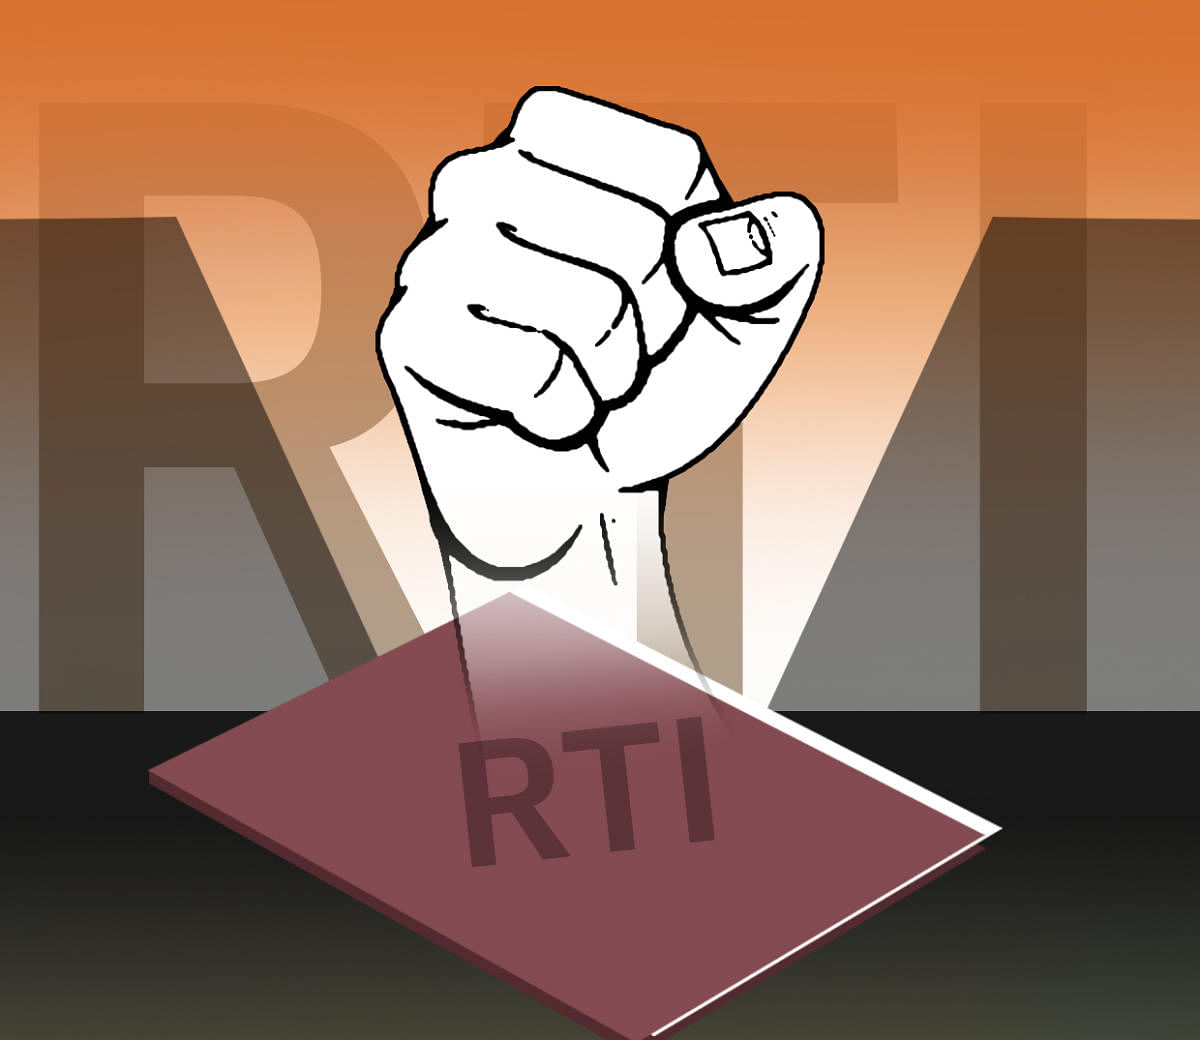 RTI and privacy: Congruence or conflict?